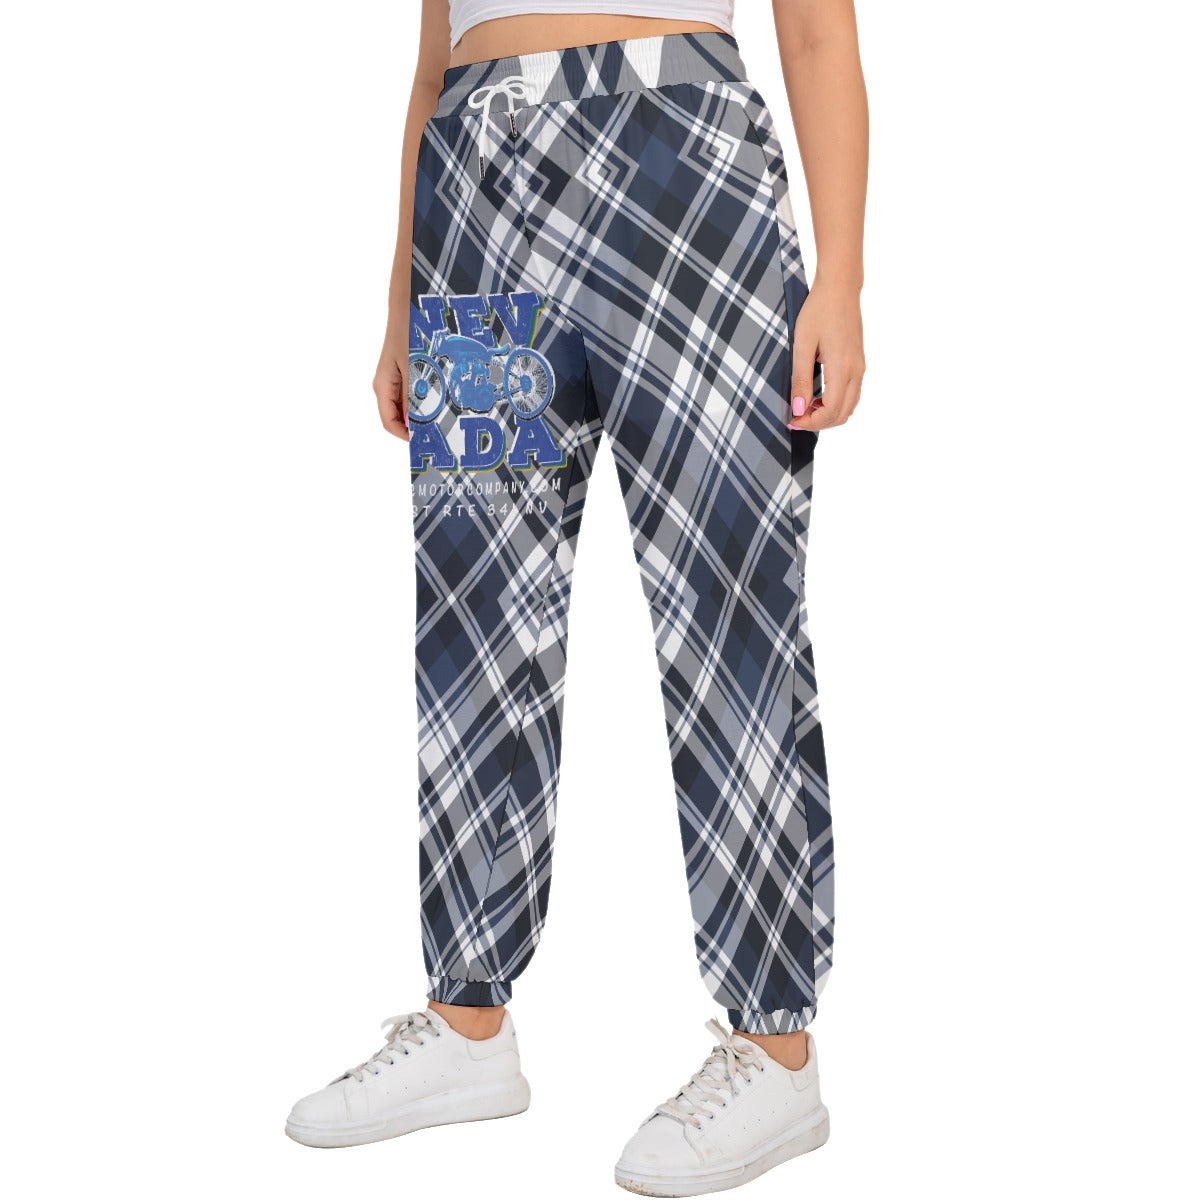 Nevada Blue and Grey Soft Terry Lounge Pant with Pocket and Drawstring  Virginia City Motorcycle Company Apparel 